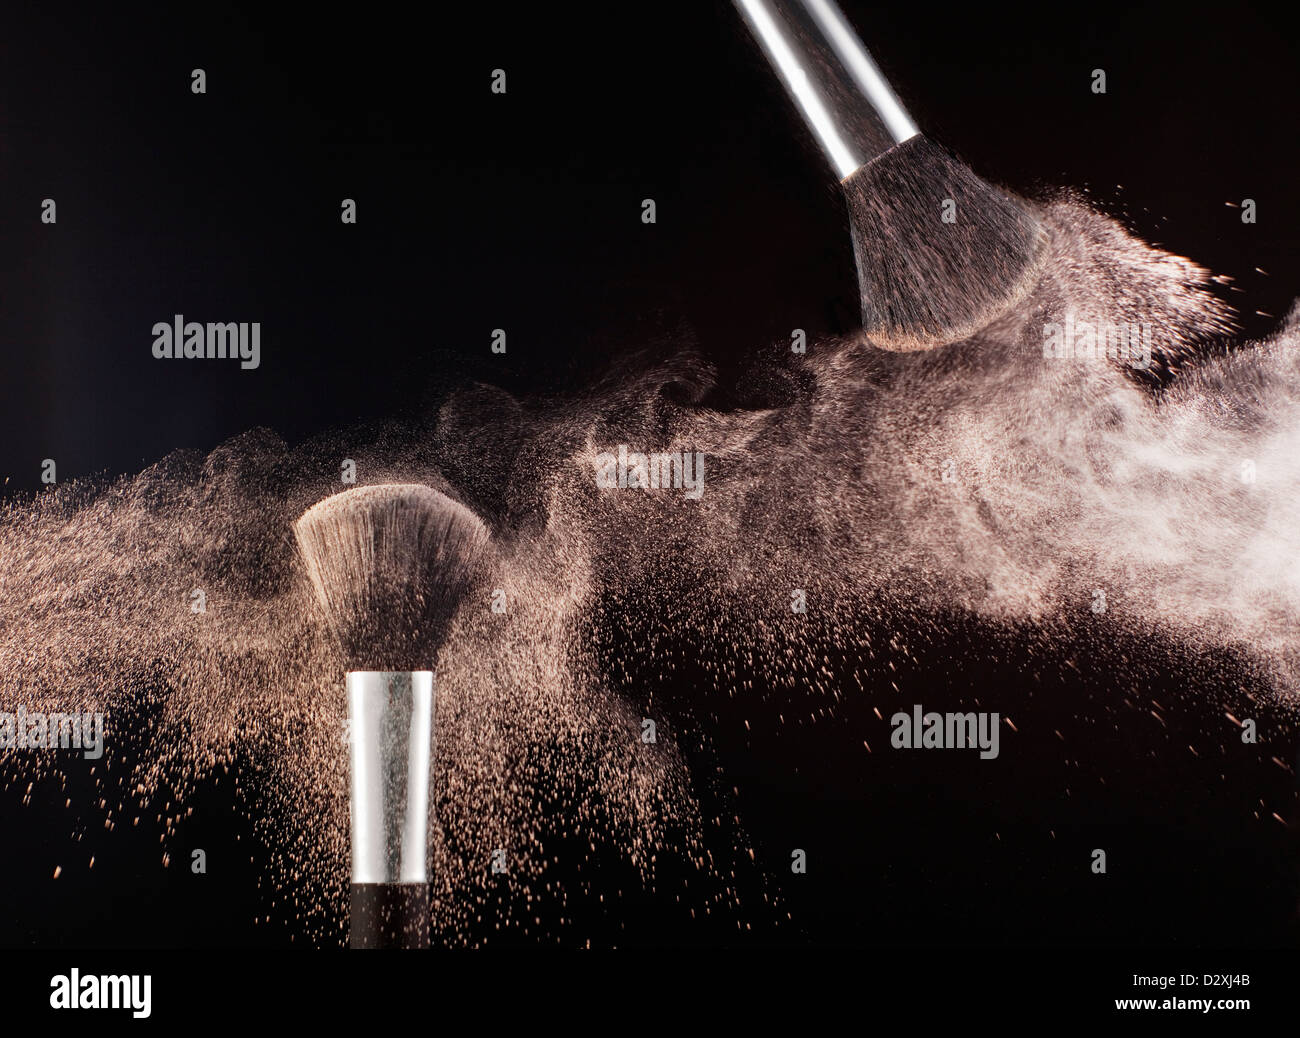 Powder blowing from makeup brushes Stock Photo